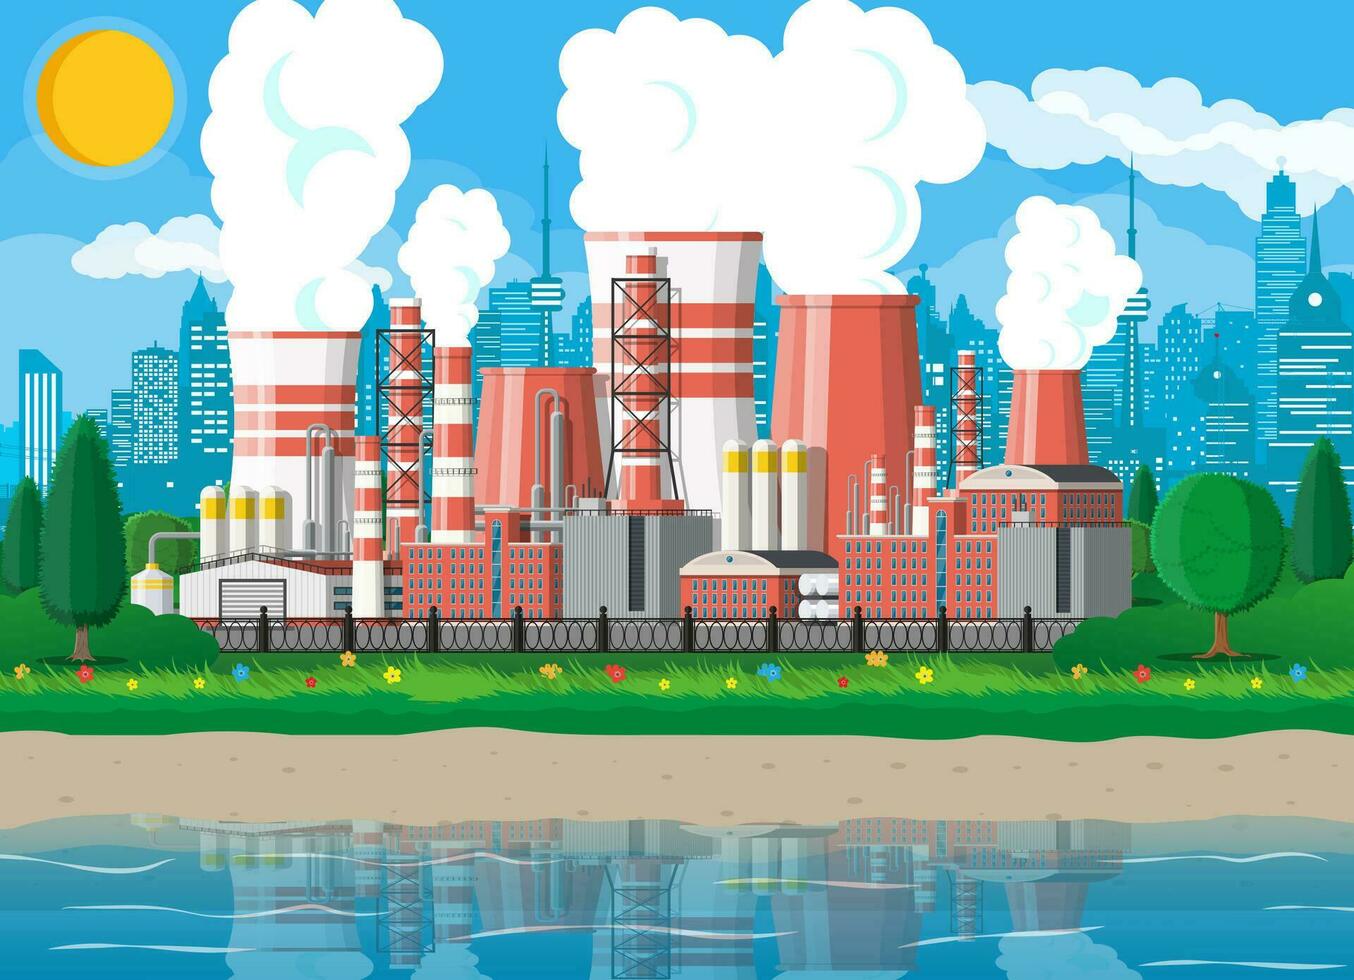 Factory building. Industrial factory, power plant. Pipes, buildings, warehouse, storage tank. Cityscape urban skyline, water reservoir, clouds trees and sun. Vector illustration in flat style